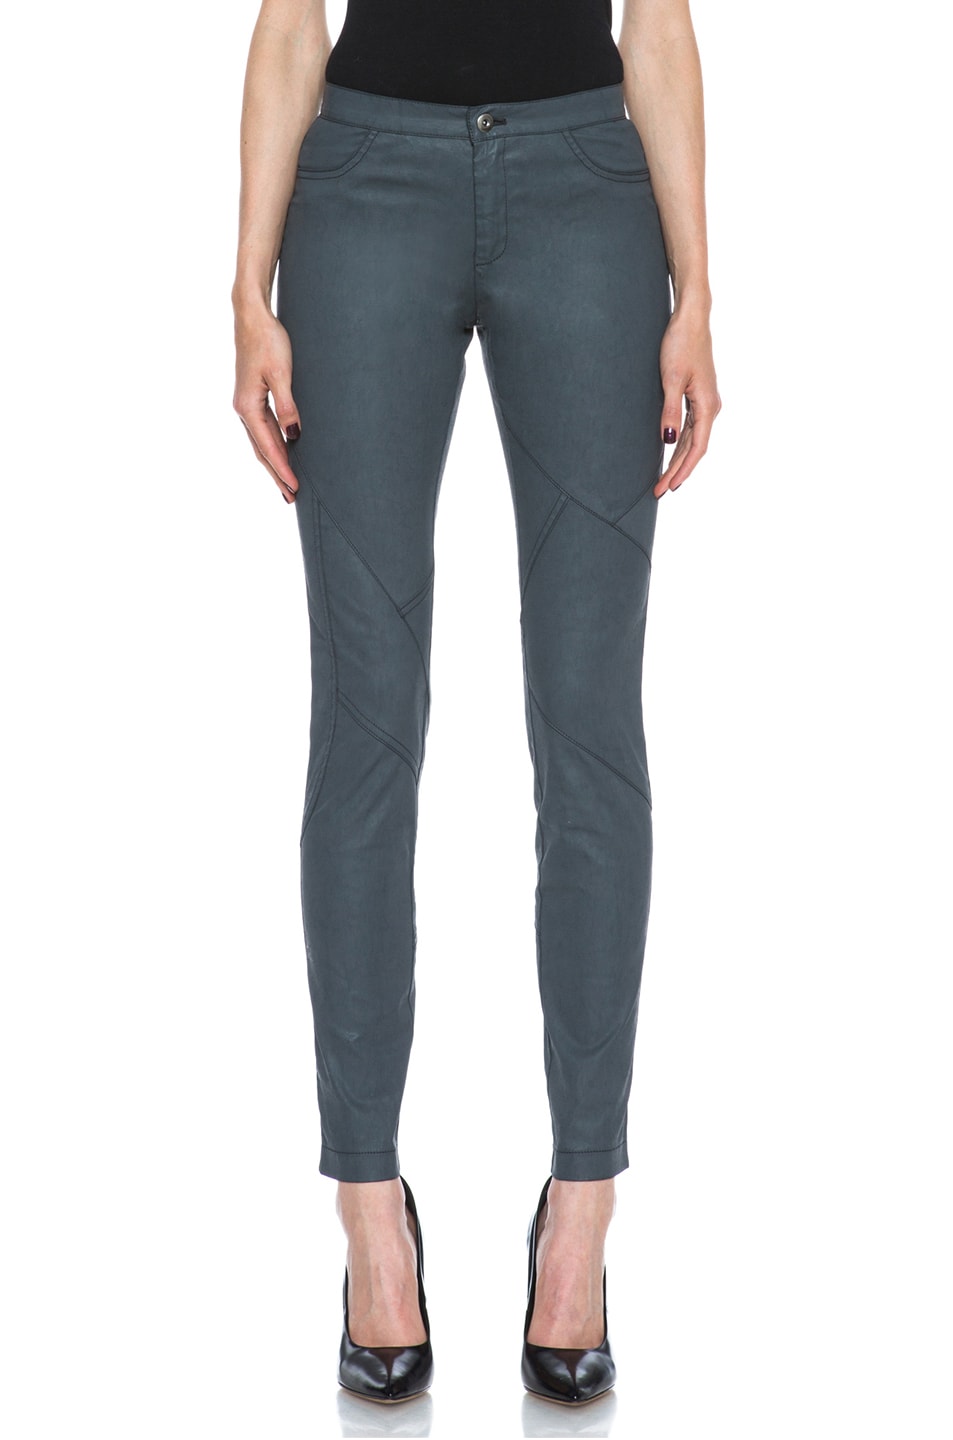 Image 1 of Tess Giberson Coated Cotton Pieced Legging in Charcoal